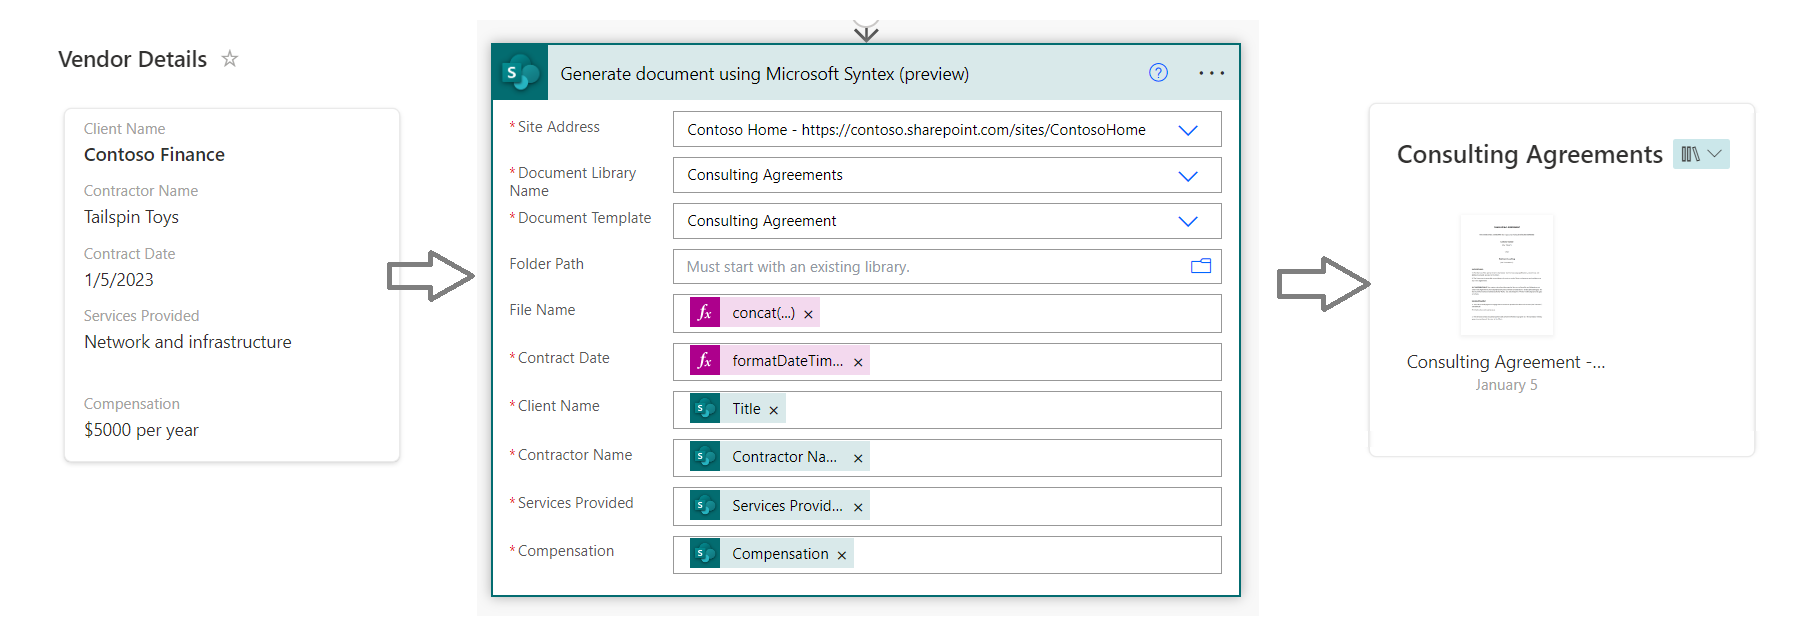 Microsoft Syntex and Power Automate to auto-generate documents